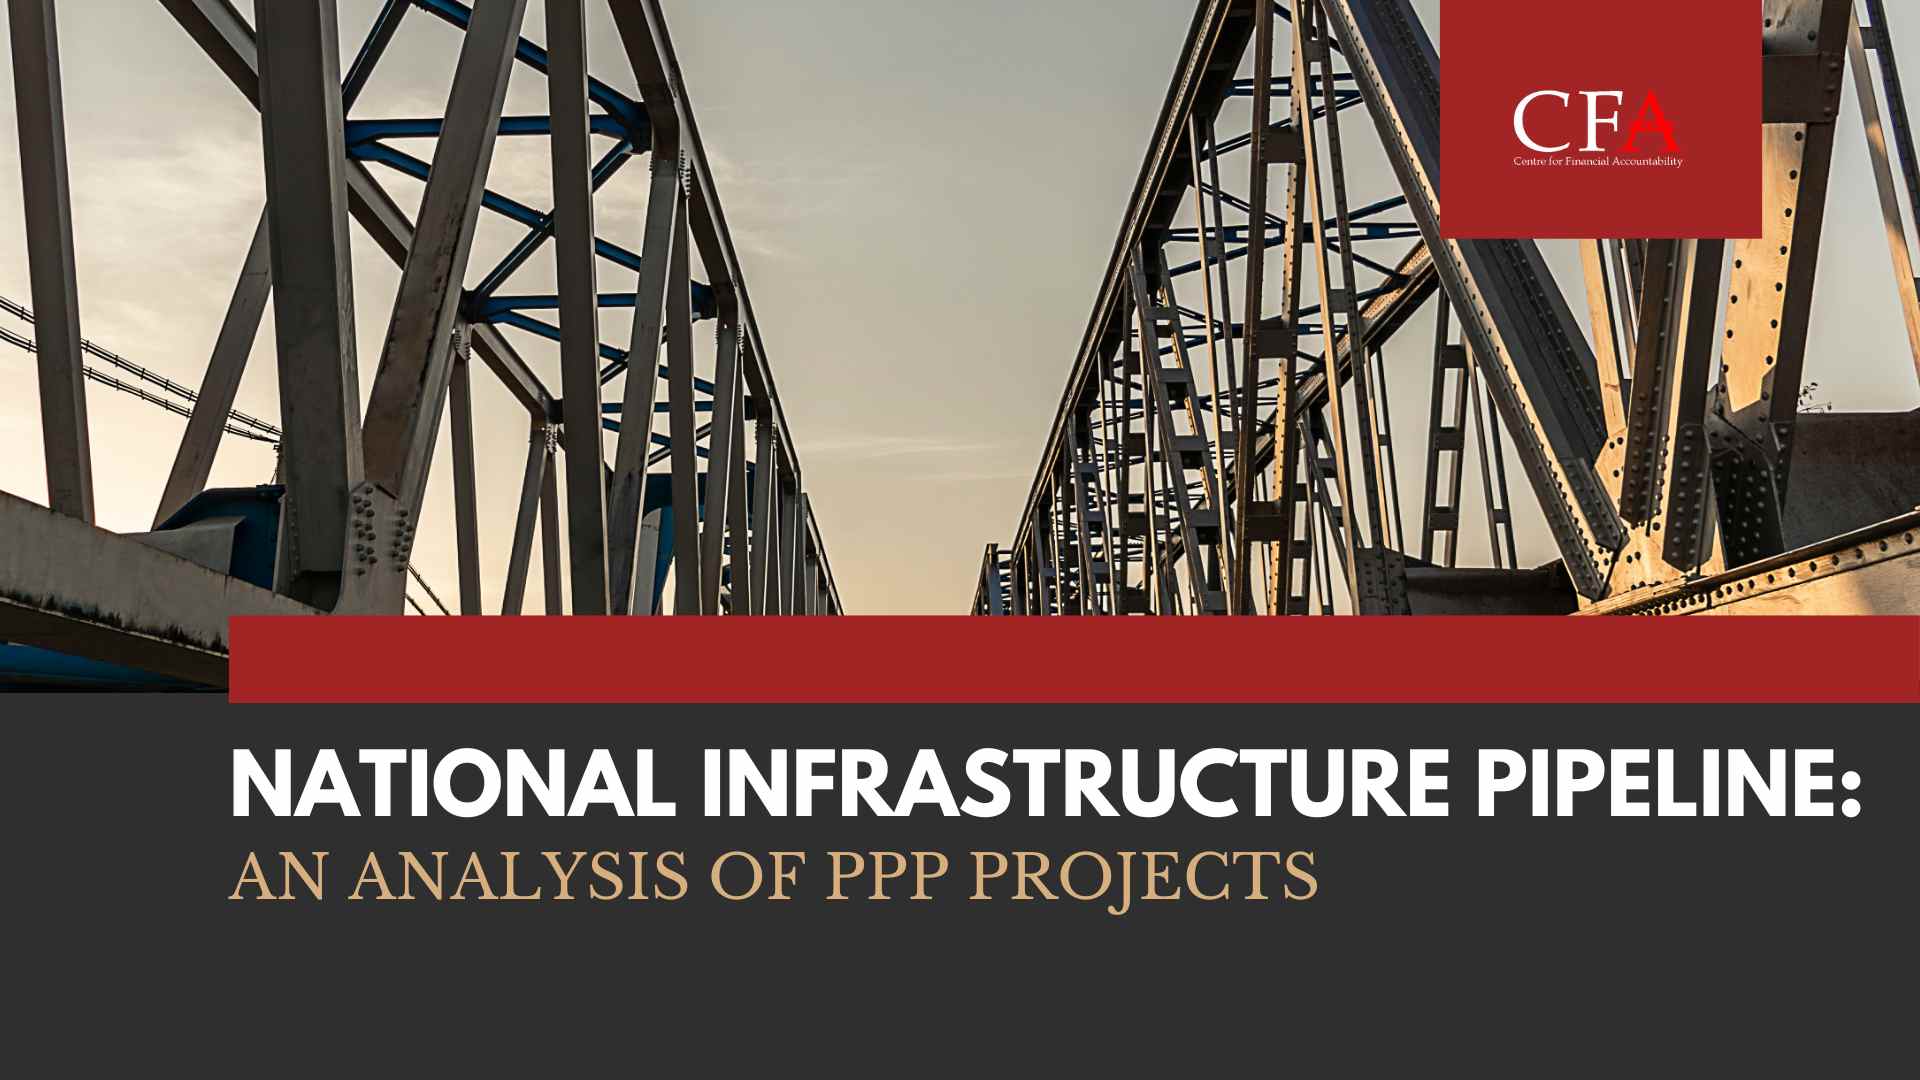 National Infrastructure Pipeline: An analysis of PPP projects